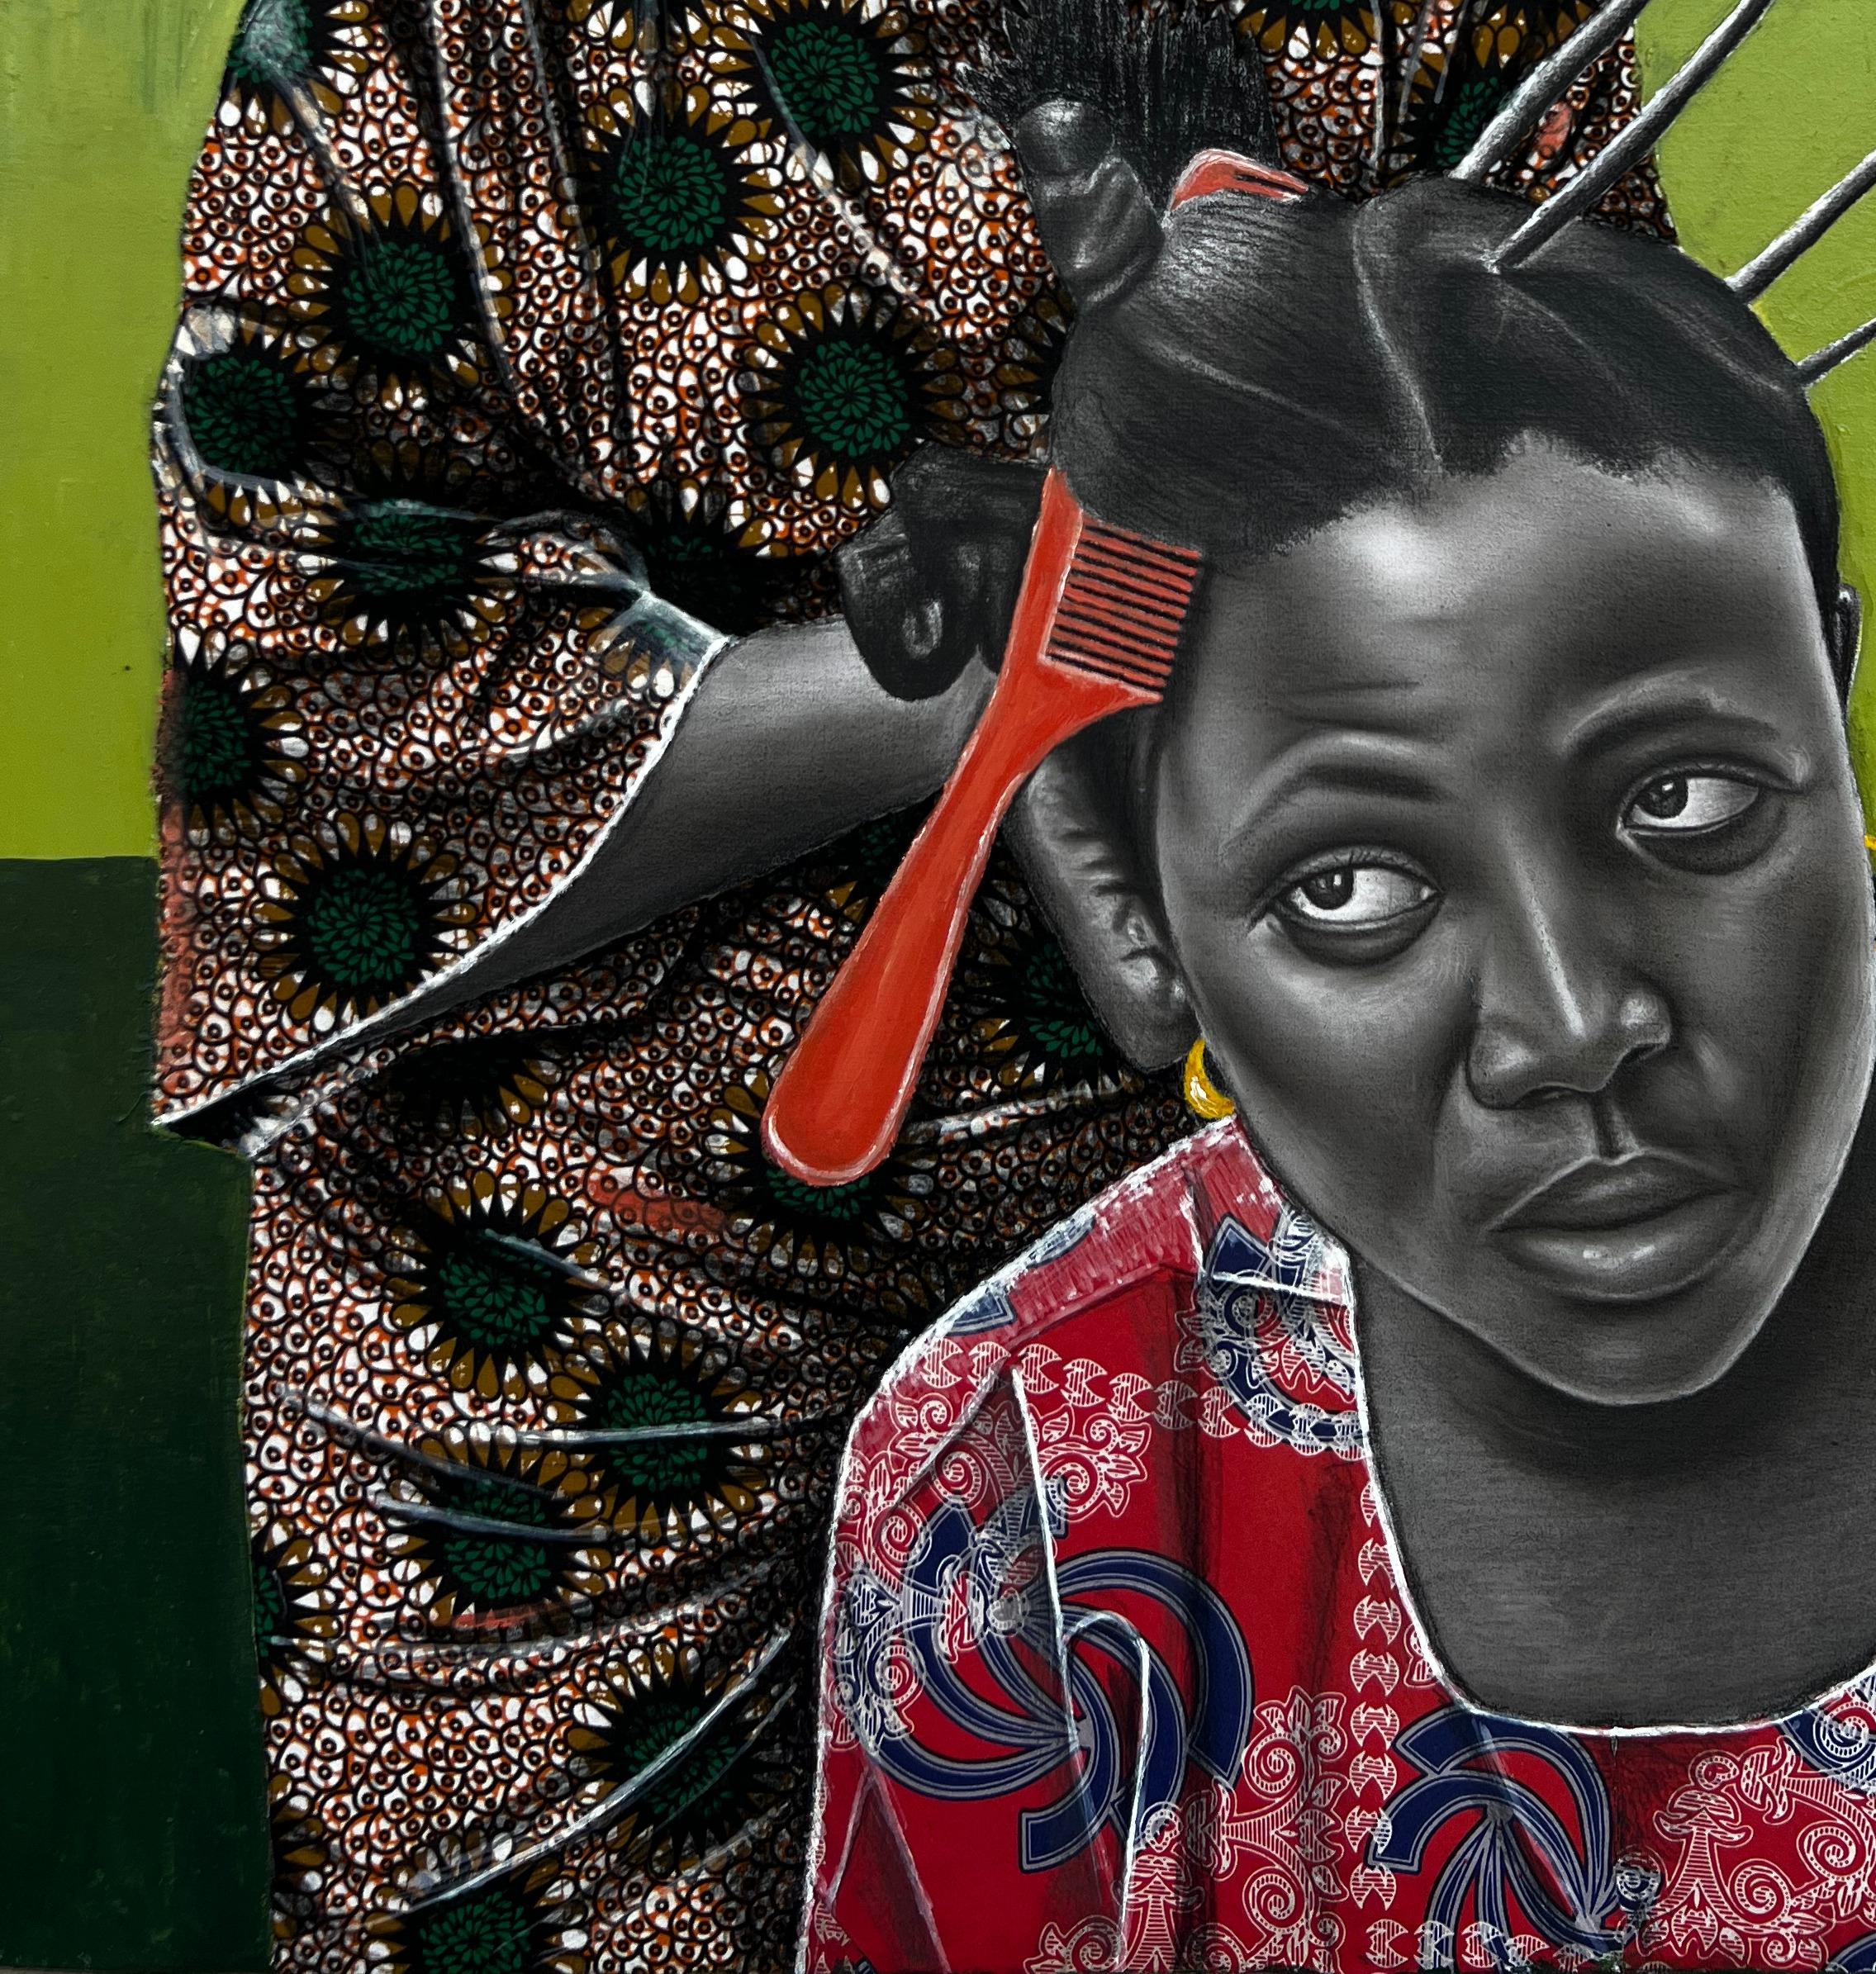 For Tomorrow's Festival  - Black Portrait Painting by Ademola Clement Ajayi